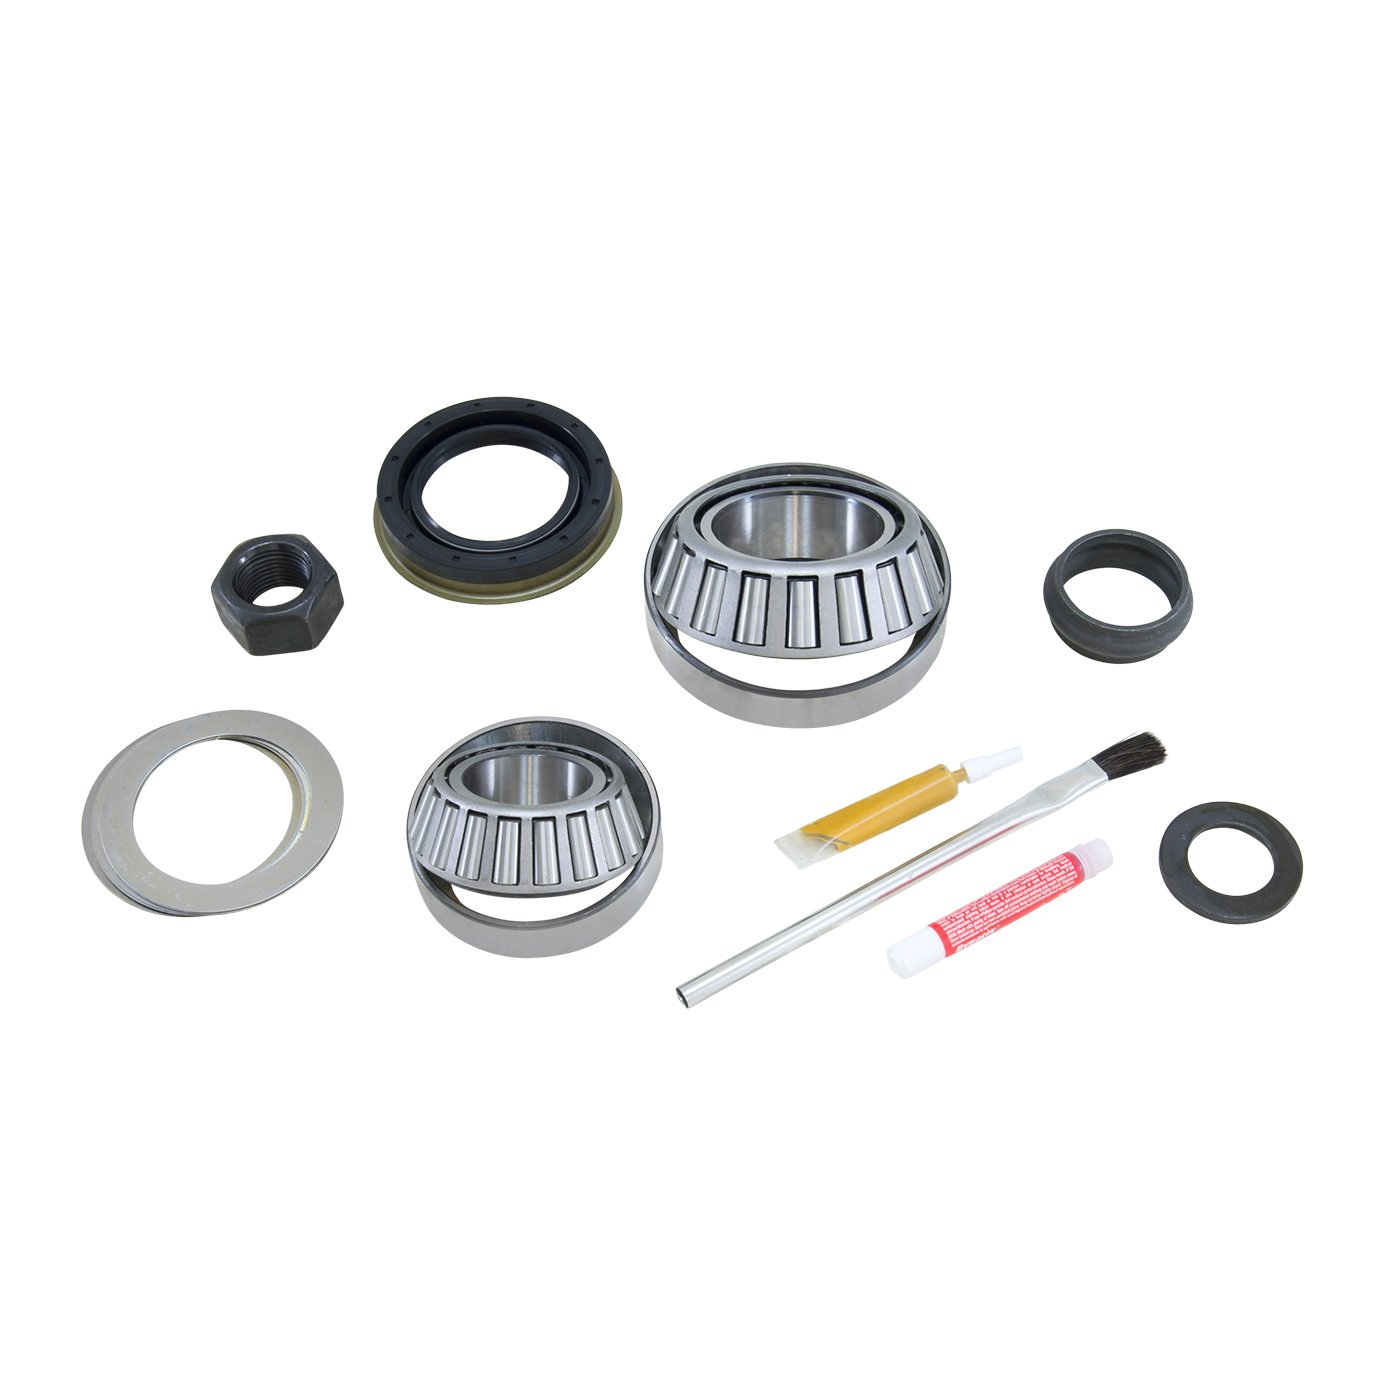 Pinion Install Kit For '92 Dana 44 Differential For Jaguar